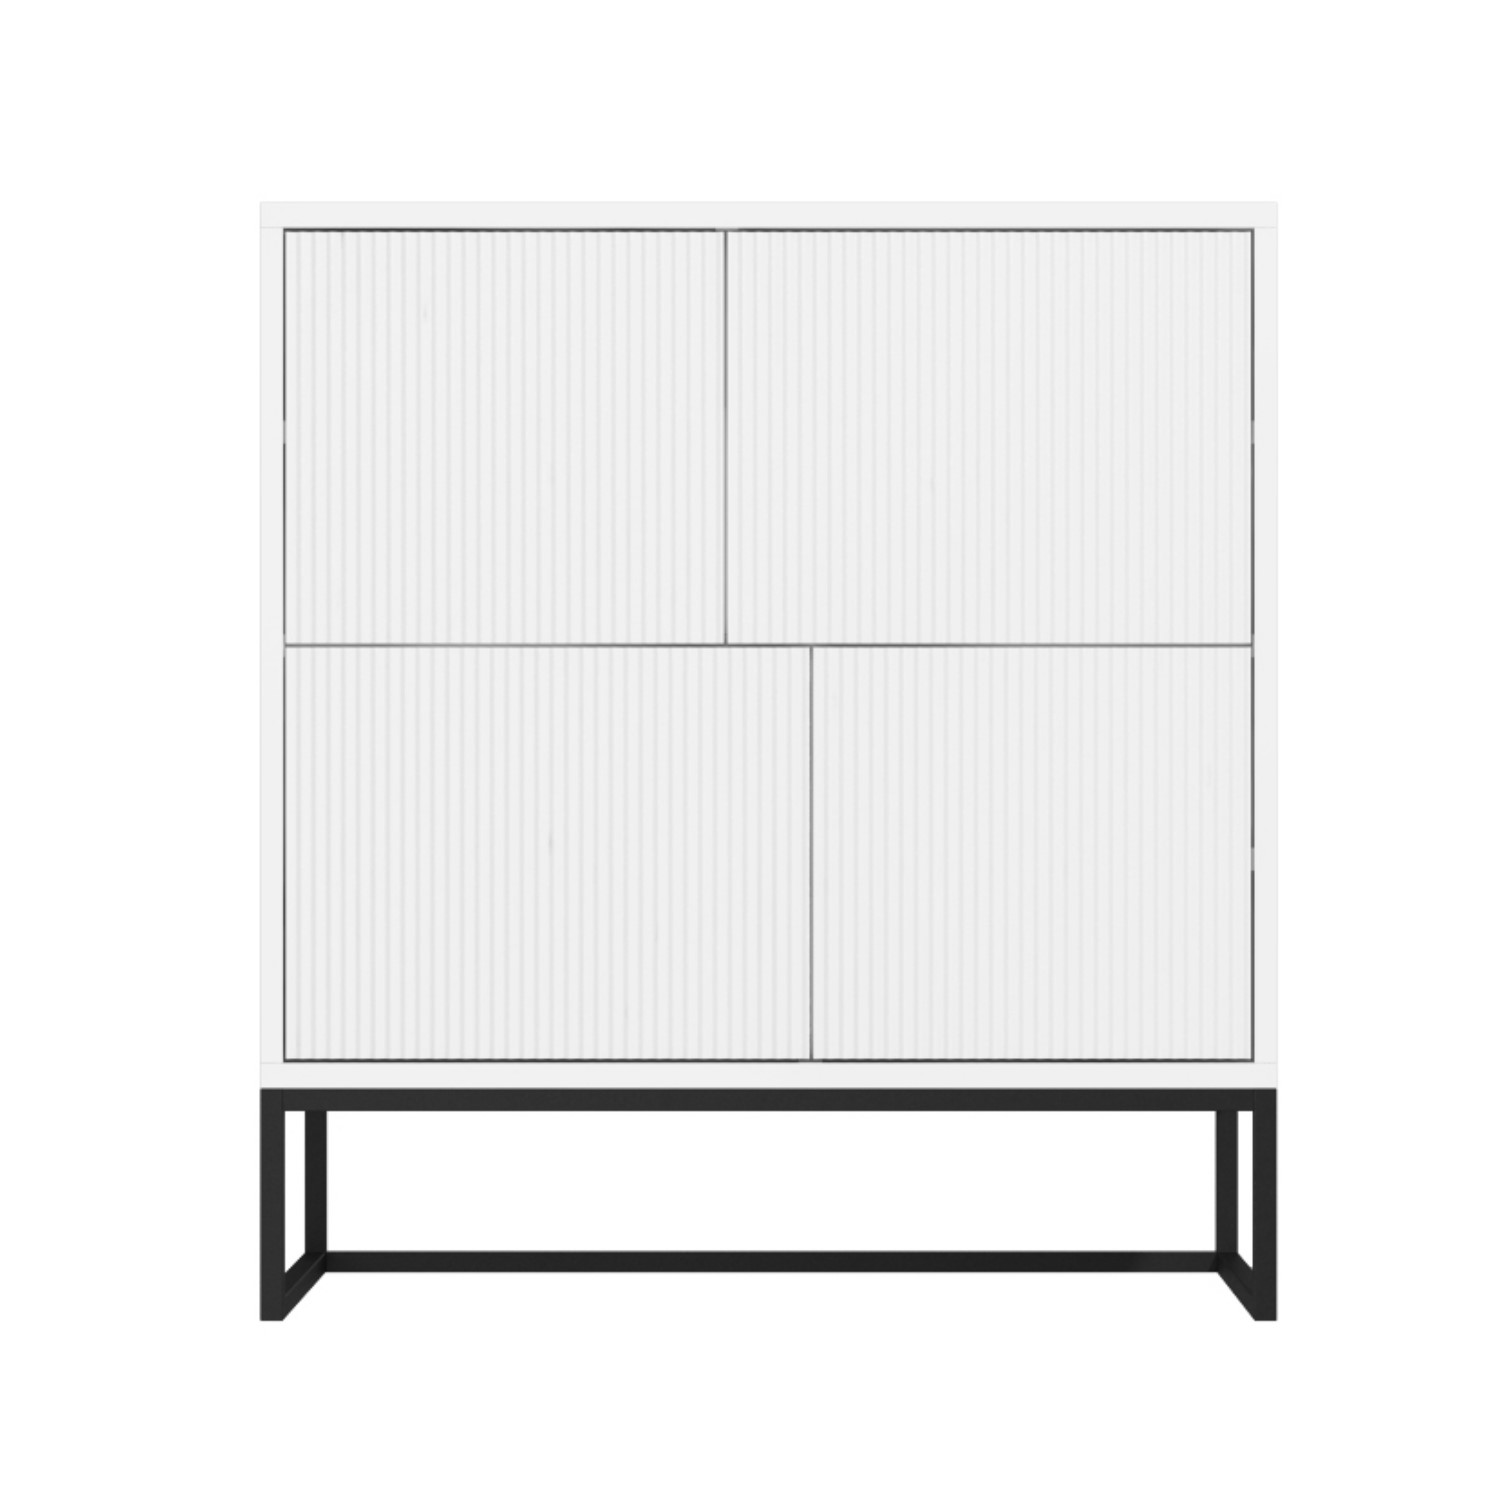 Read more about White ribbed multi-storage filing cabinet larsen